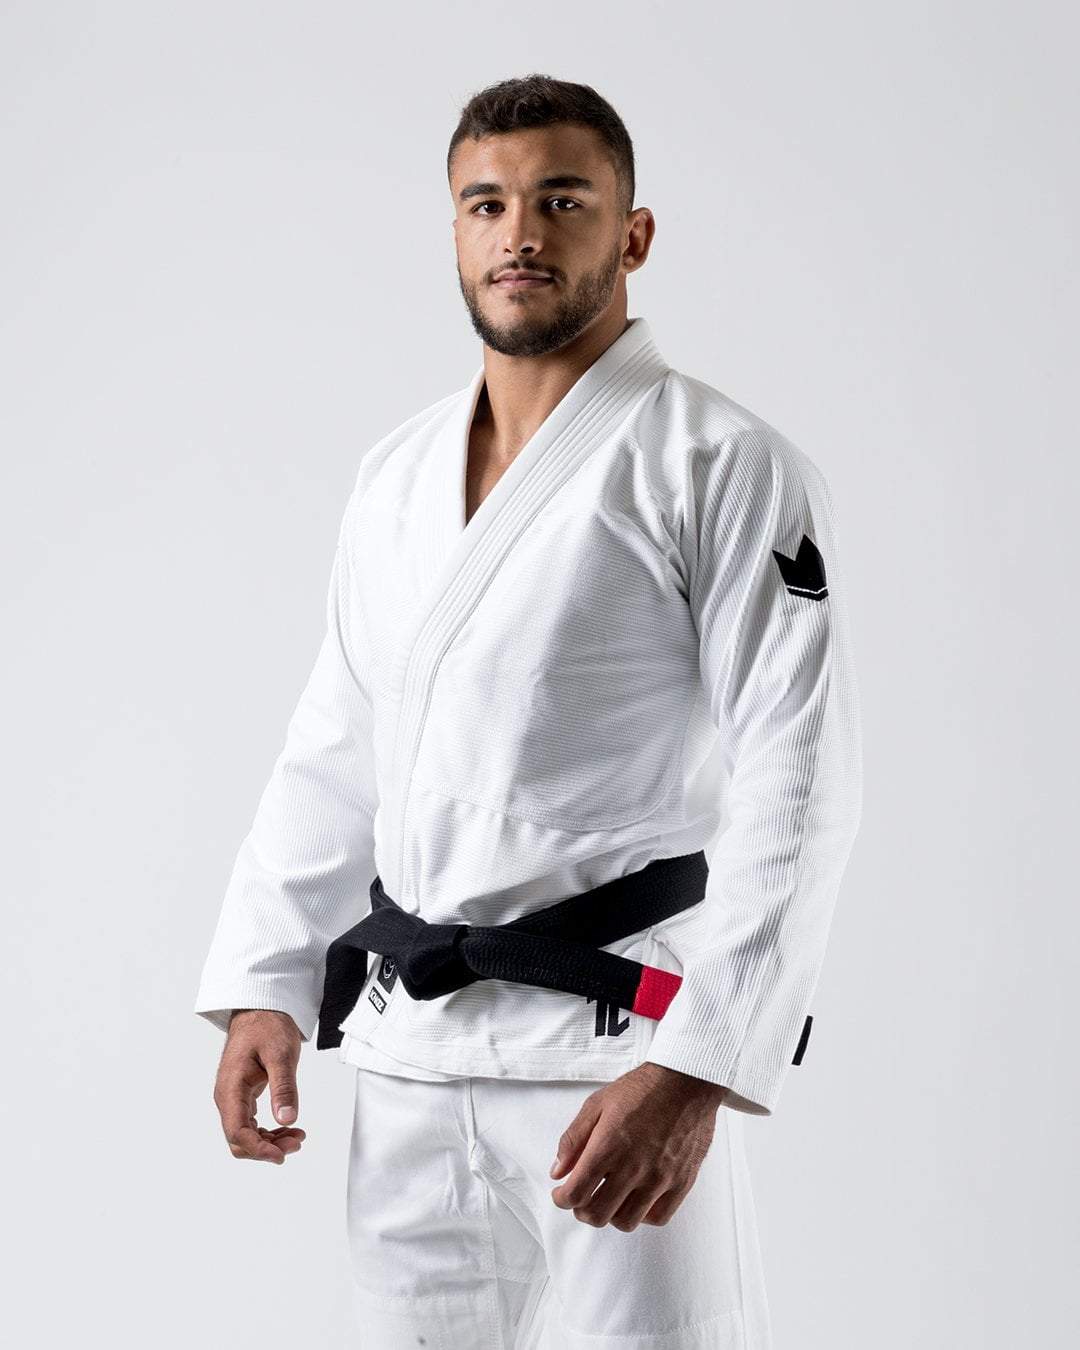 The One - With free white belt